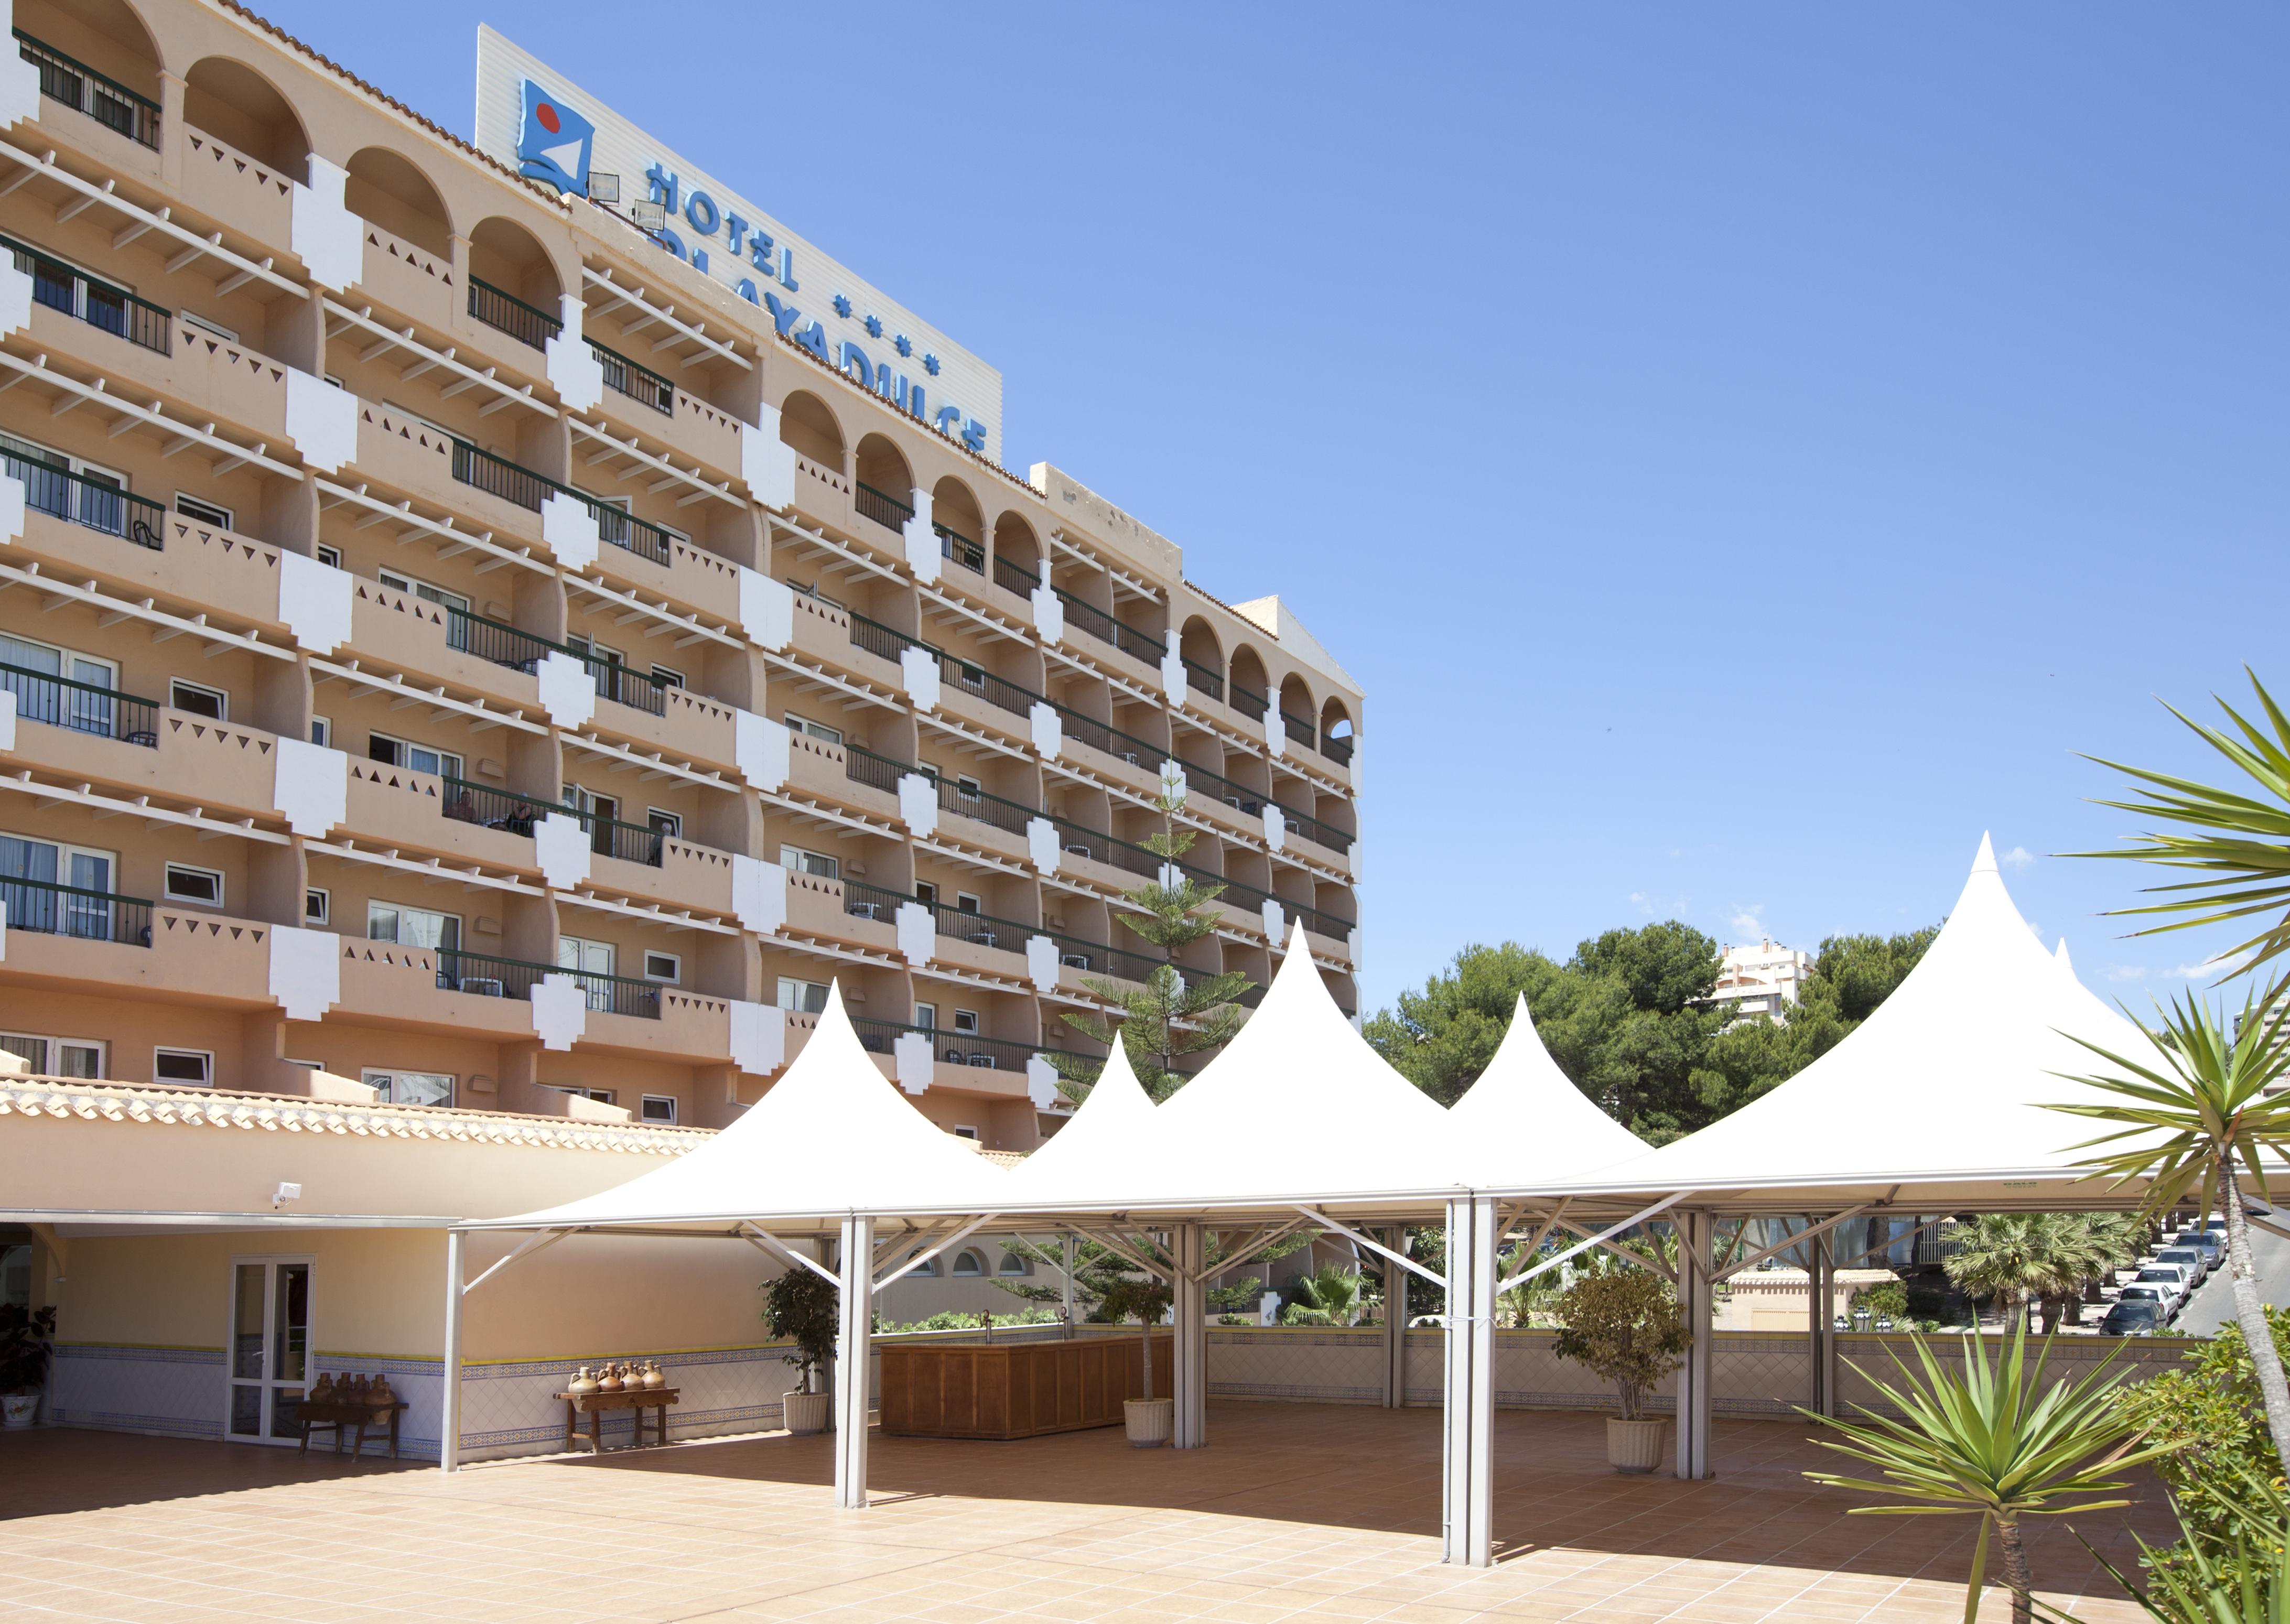 Playadulce Hotel Aguadulce  Exterior photo